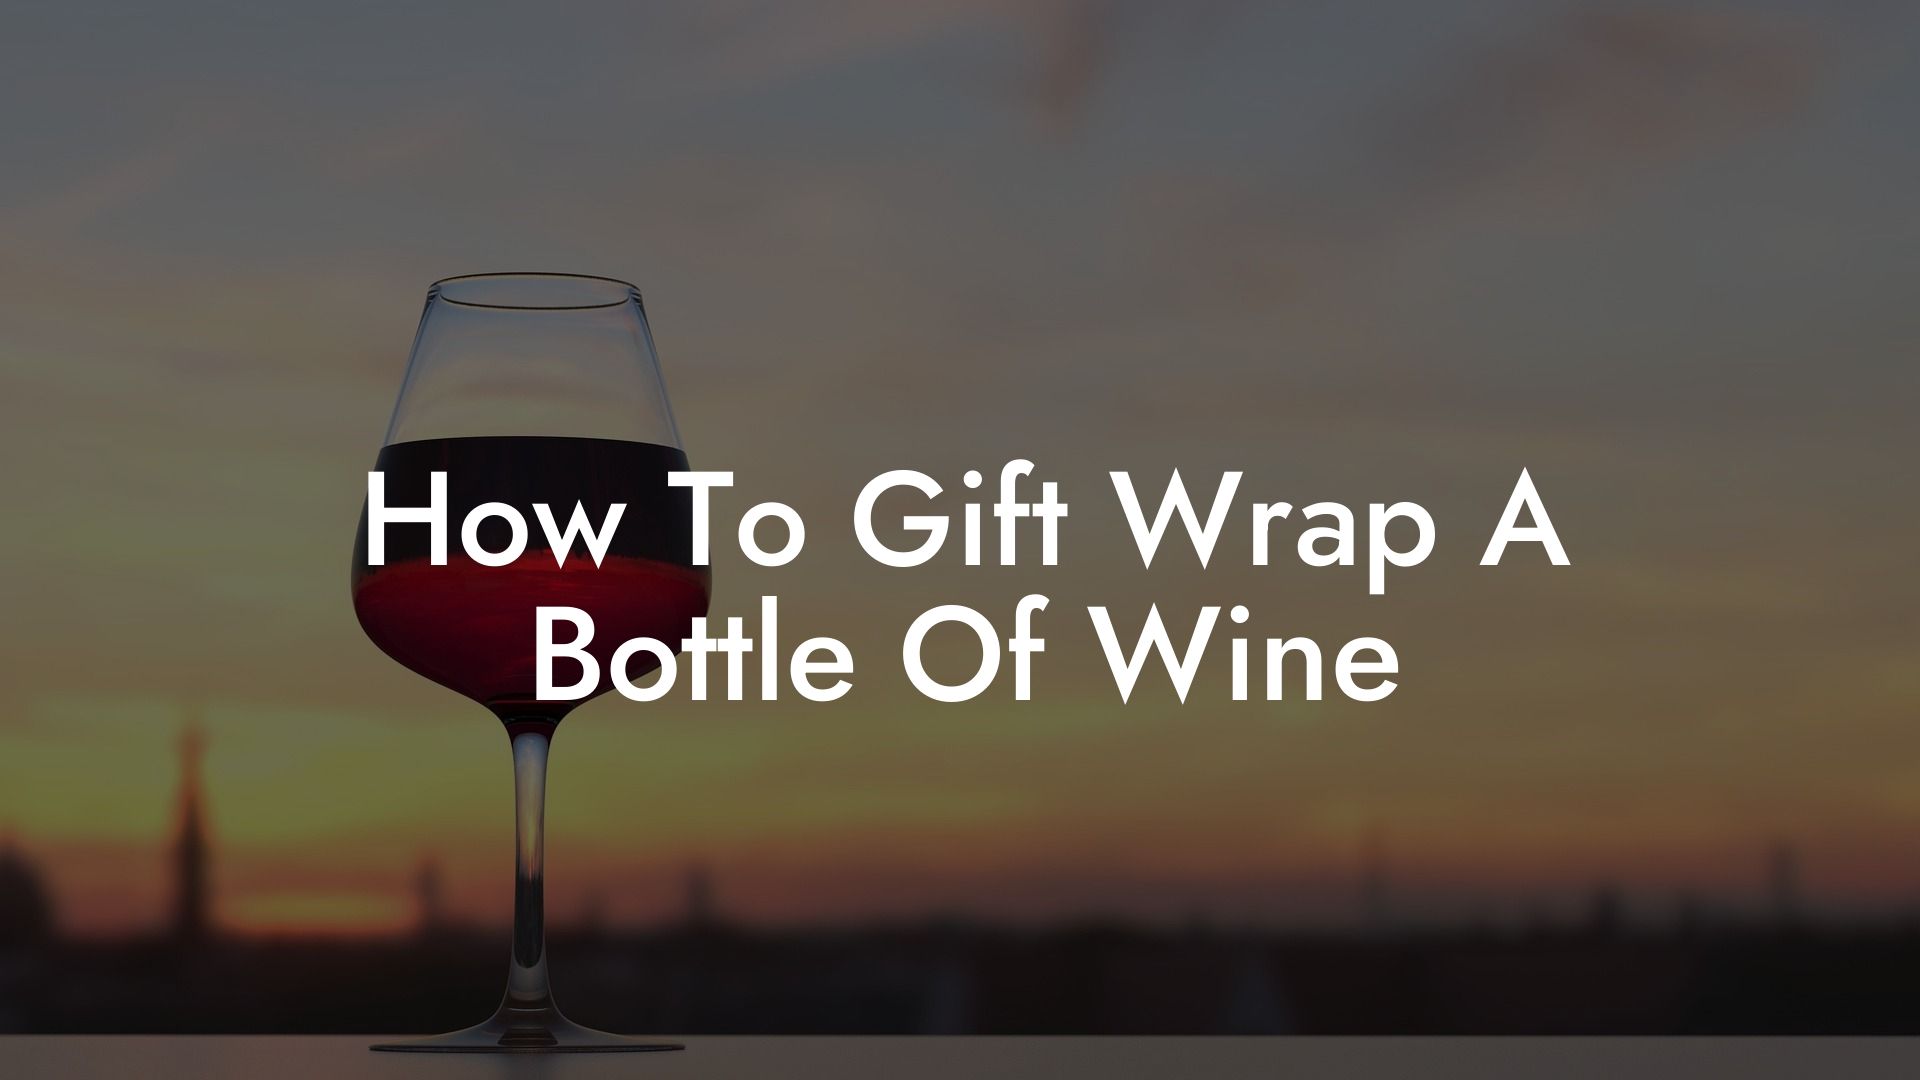 How To Gift Wrap A Bottle Of Wine